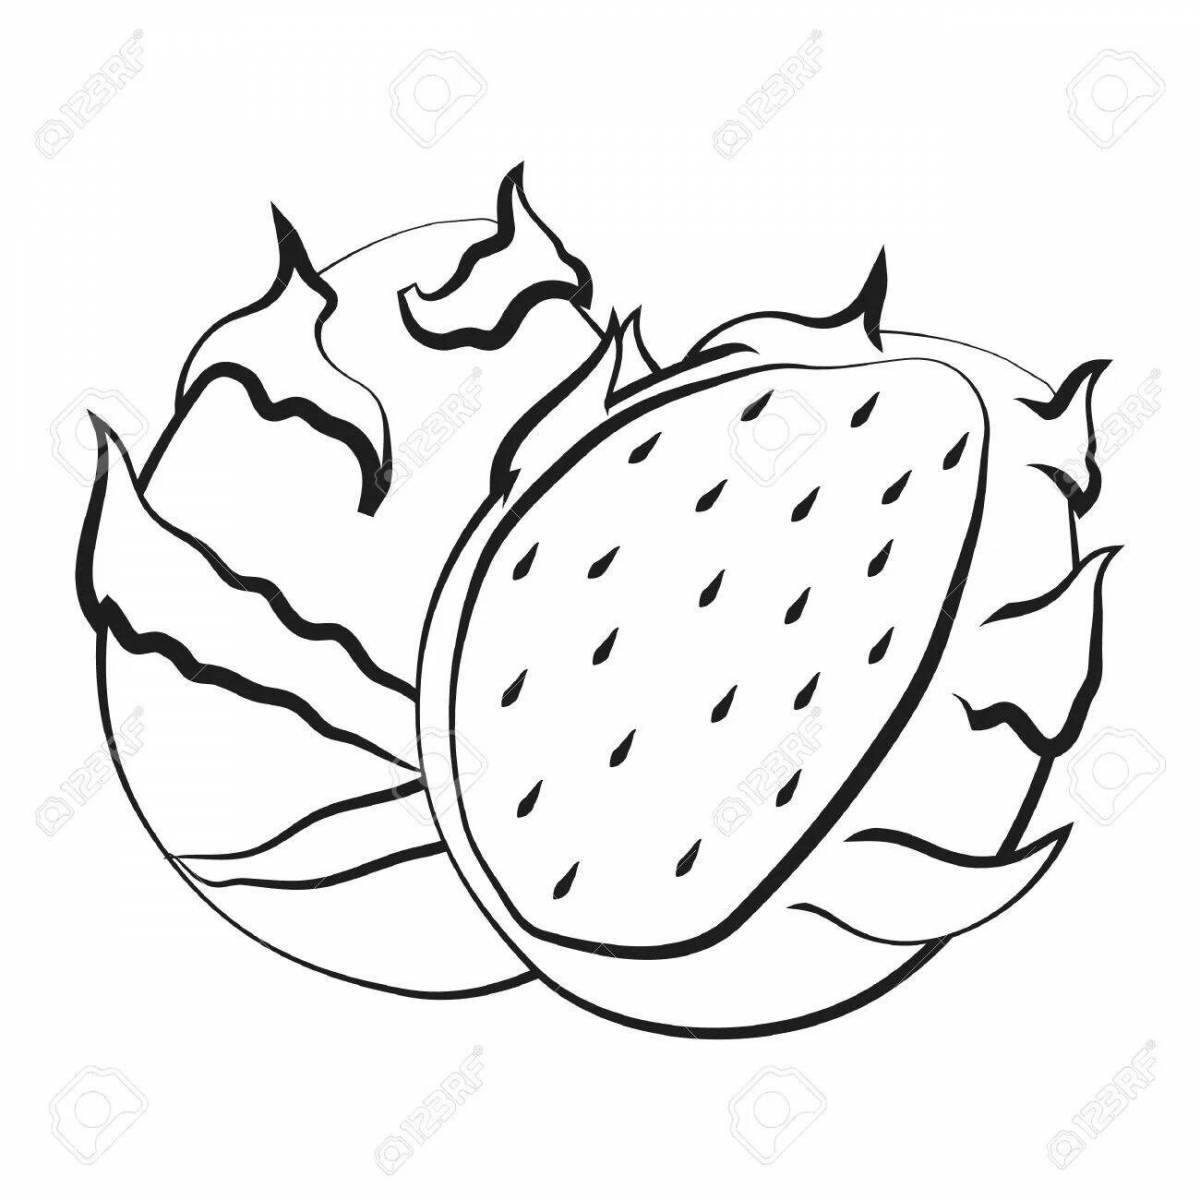 Exciting dragon fruit coloring page